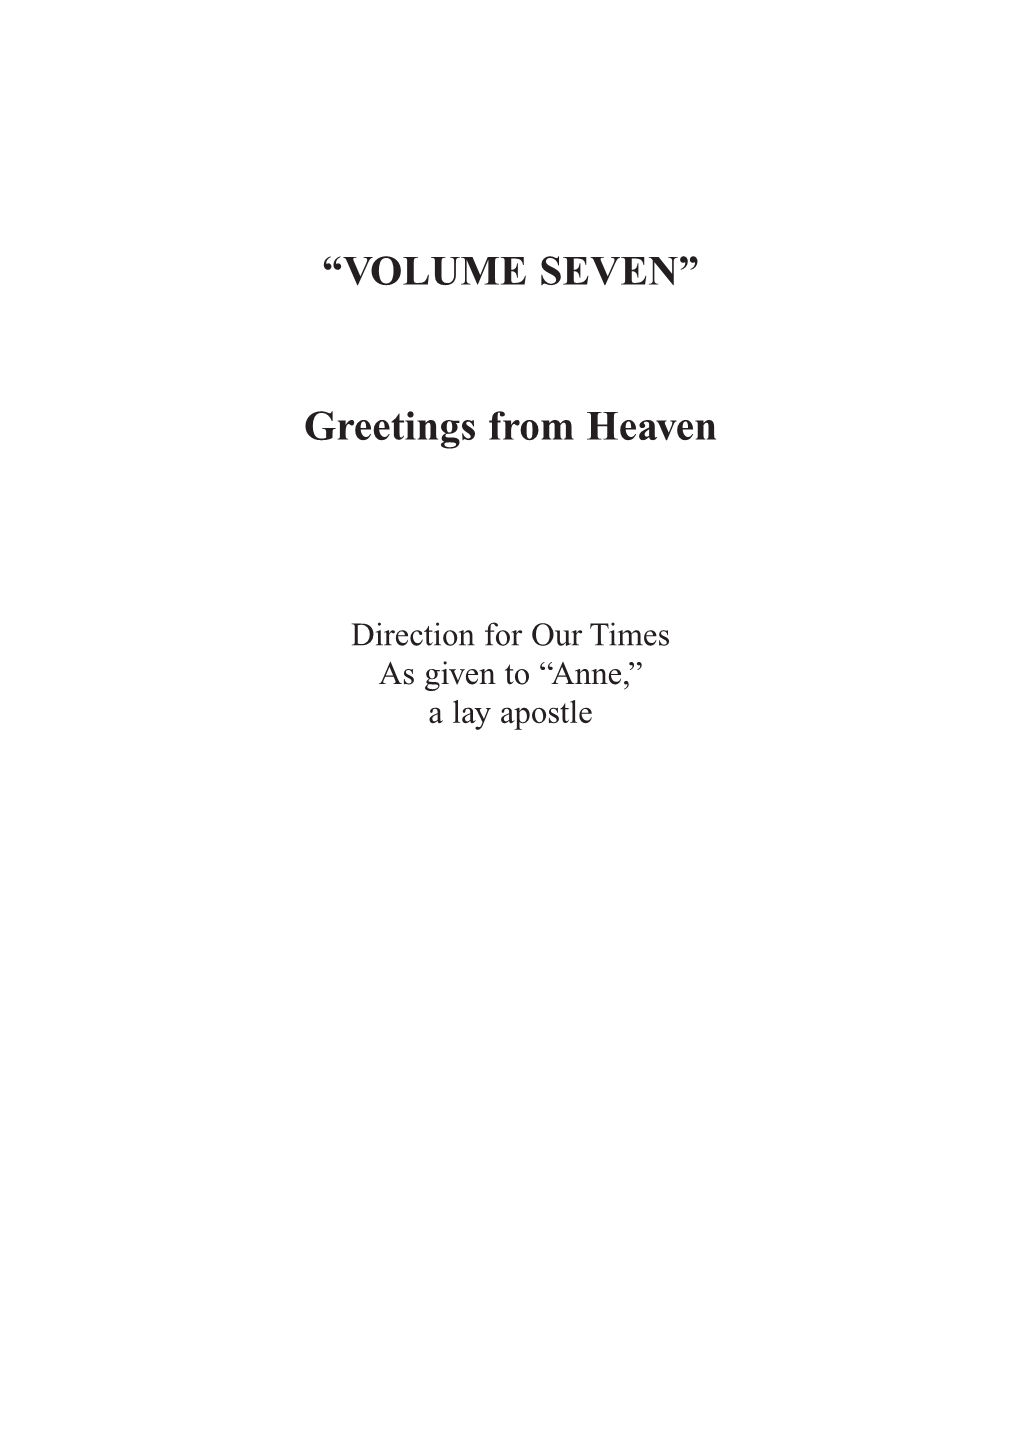 “VOLUME SEVEN” Greetings from Heaven